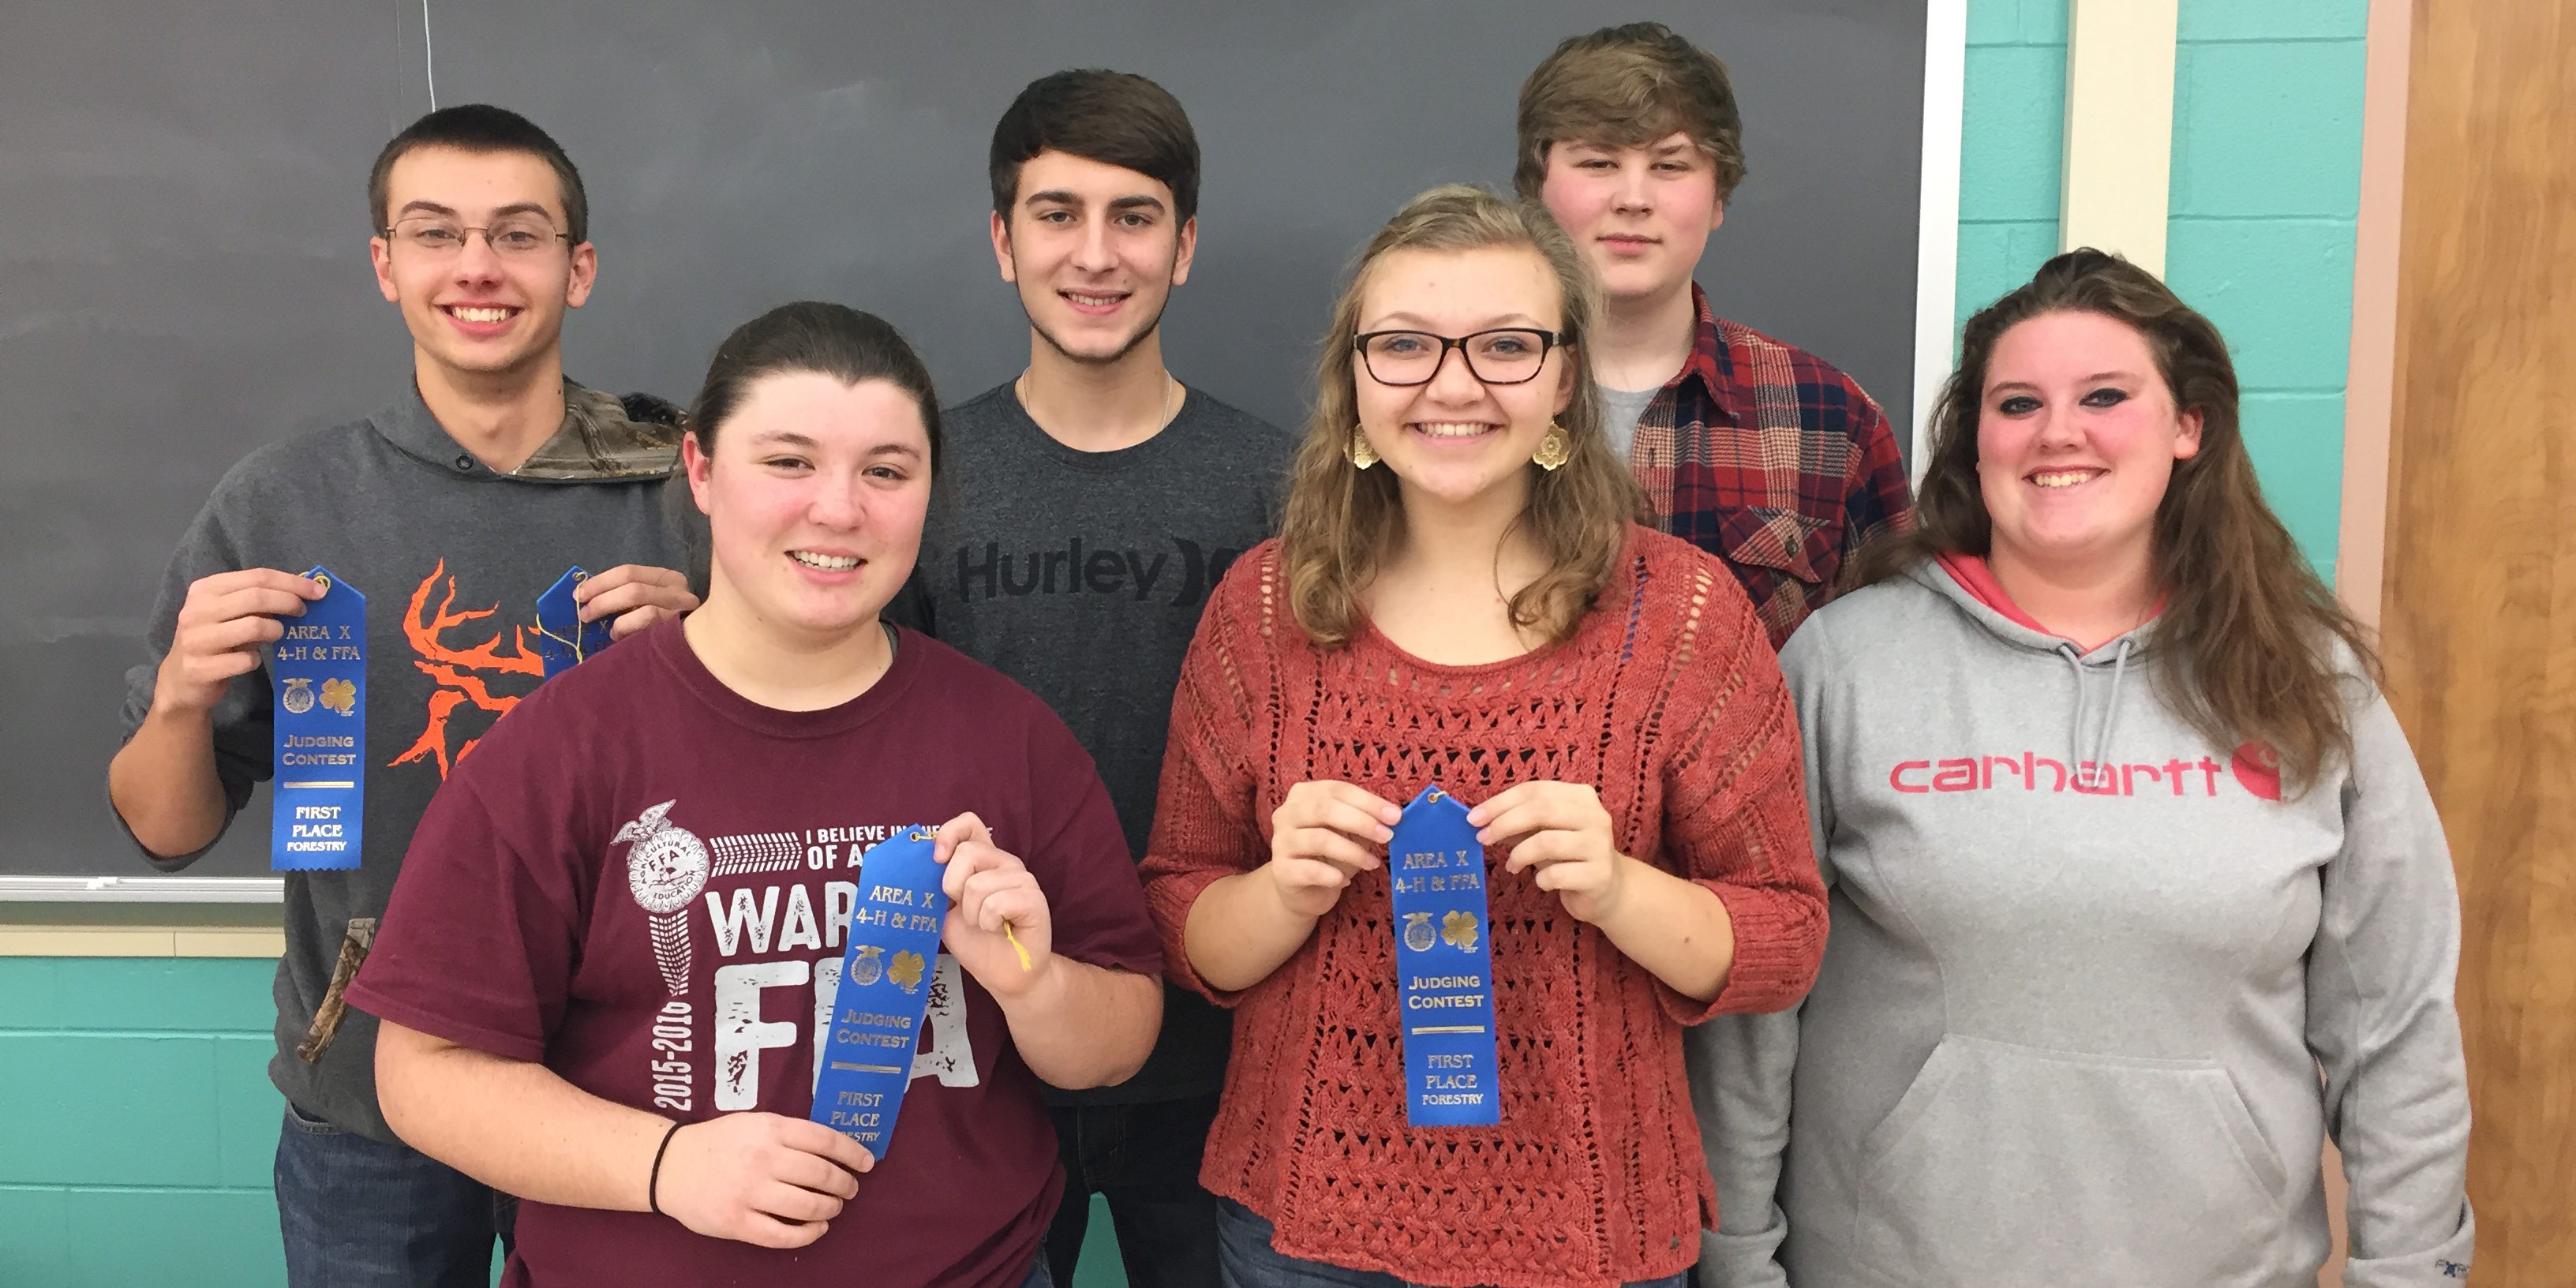 Warsaw FFA Forestry Judging Teams. In front, from left, are Taryn Whetstone, Morgan Smith and Sydney Fox. Back row are Zach Howard, Grant Reed and Jared Wolf.